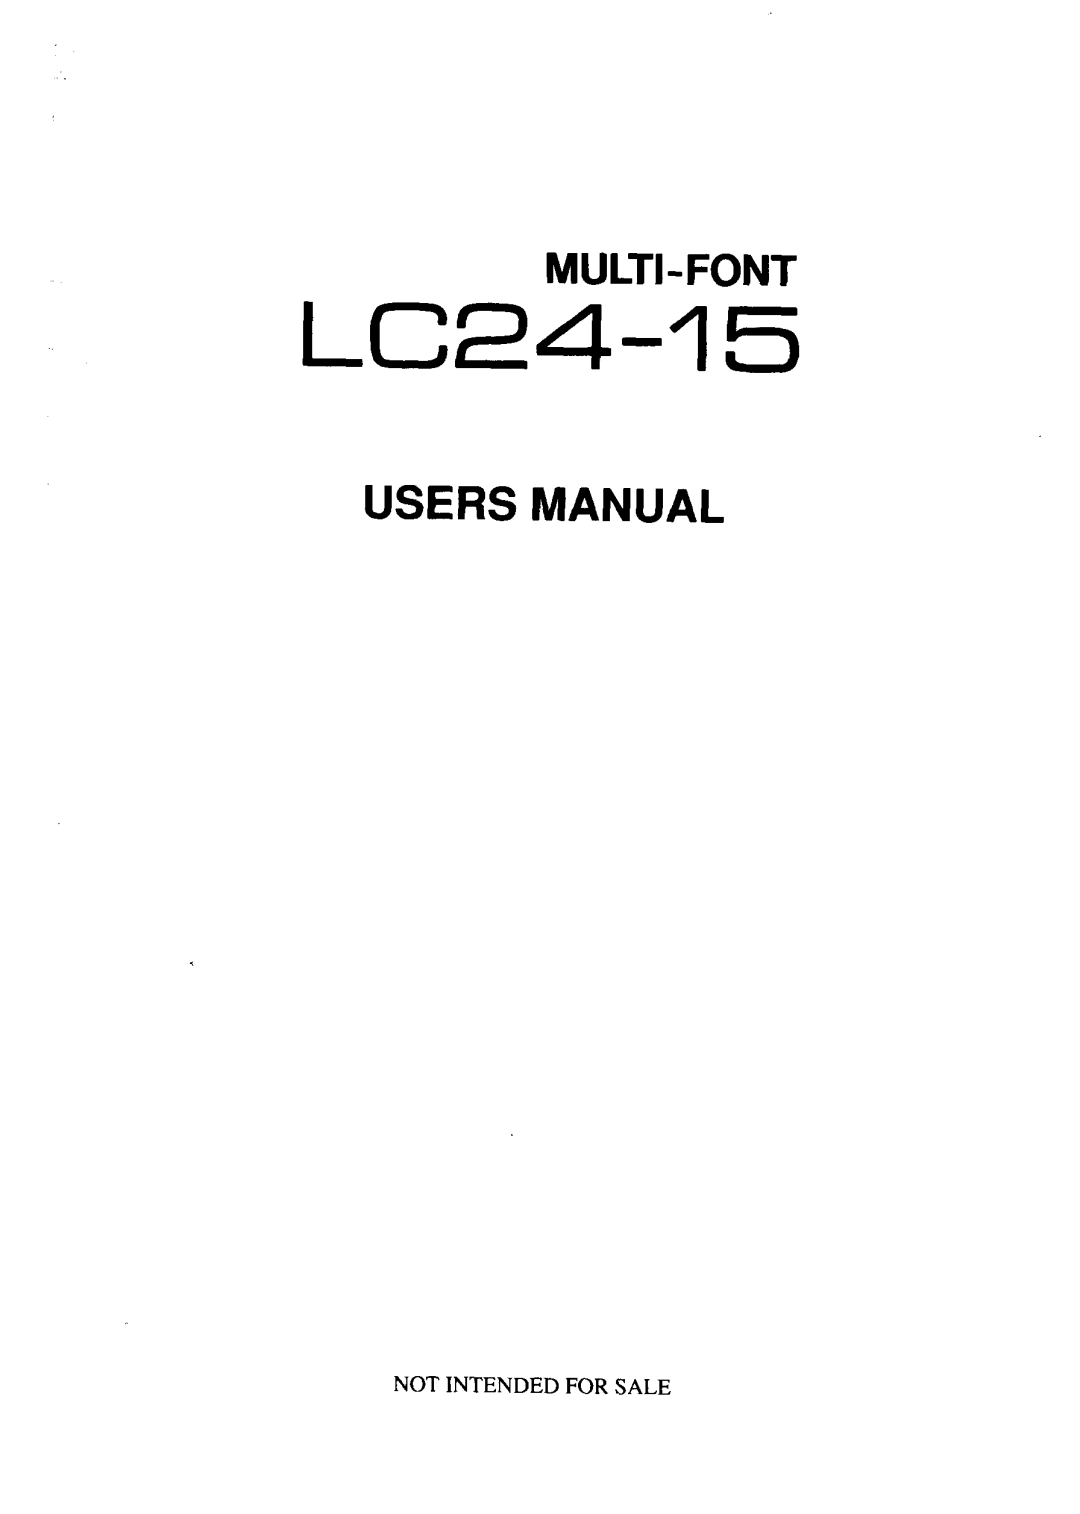 Star Micronics LC24-15 user manual Users Manual, Multi-Font, Not Intended For Sale 